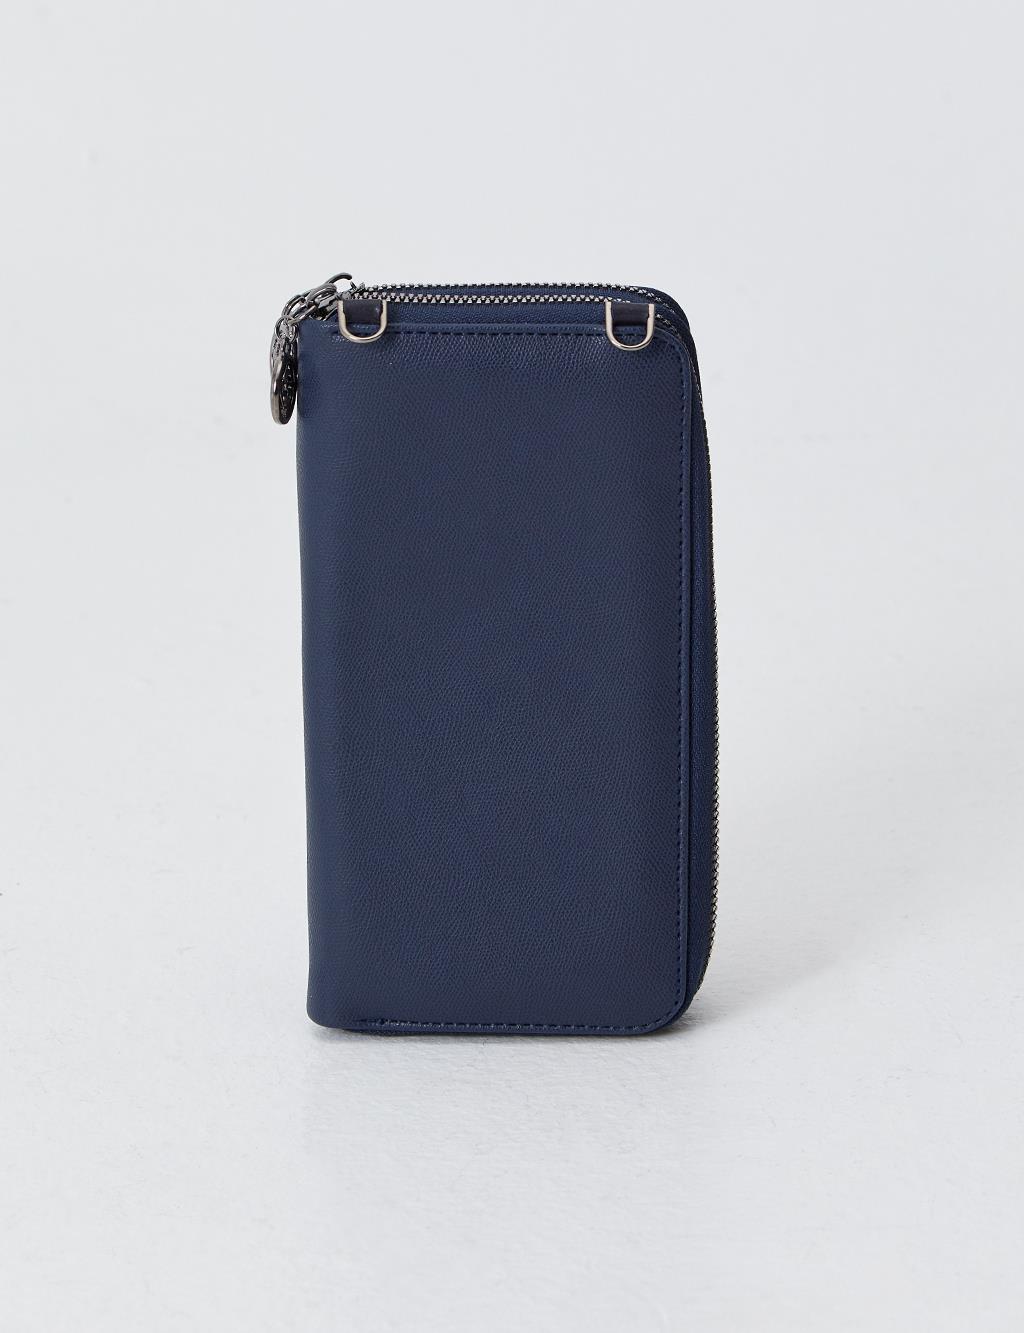 Two Compartment Wallet Bag Navy